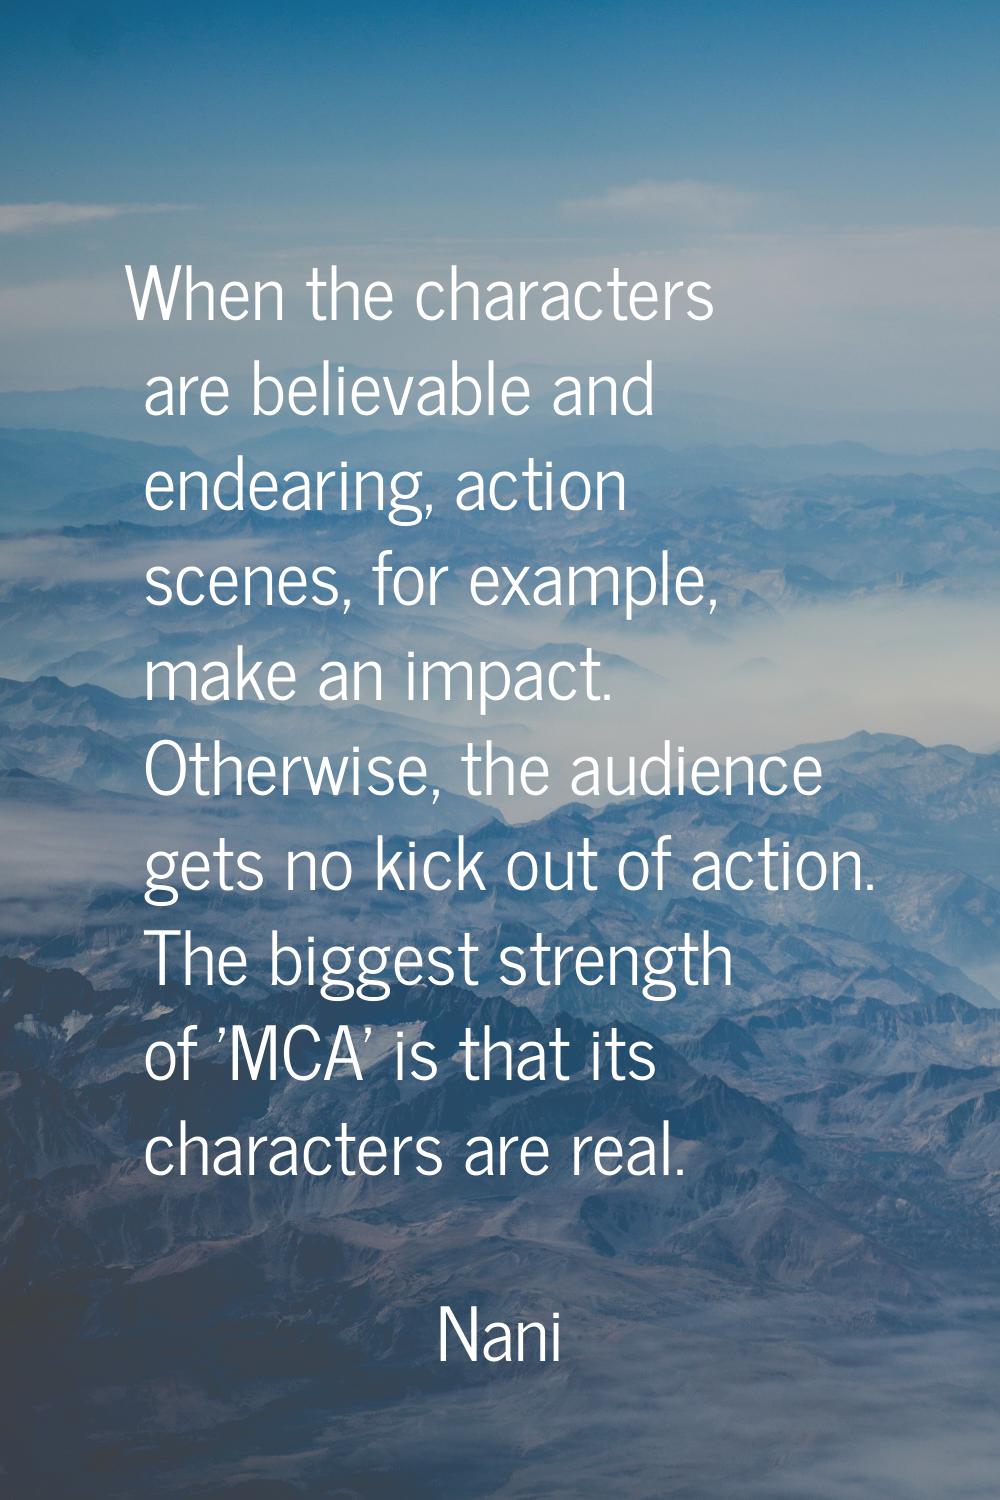 When the characters are believable and endearing, action scenes, for example, make an impact. Other